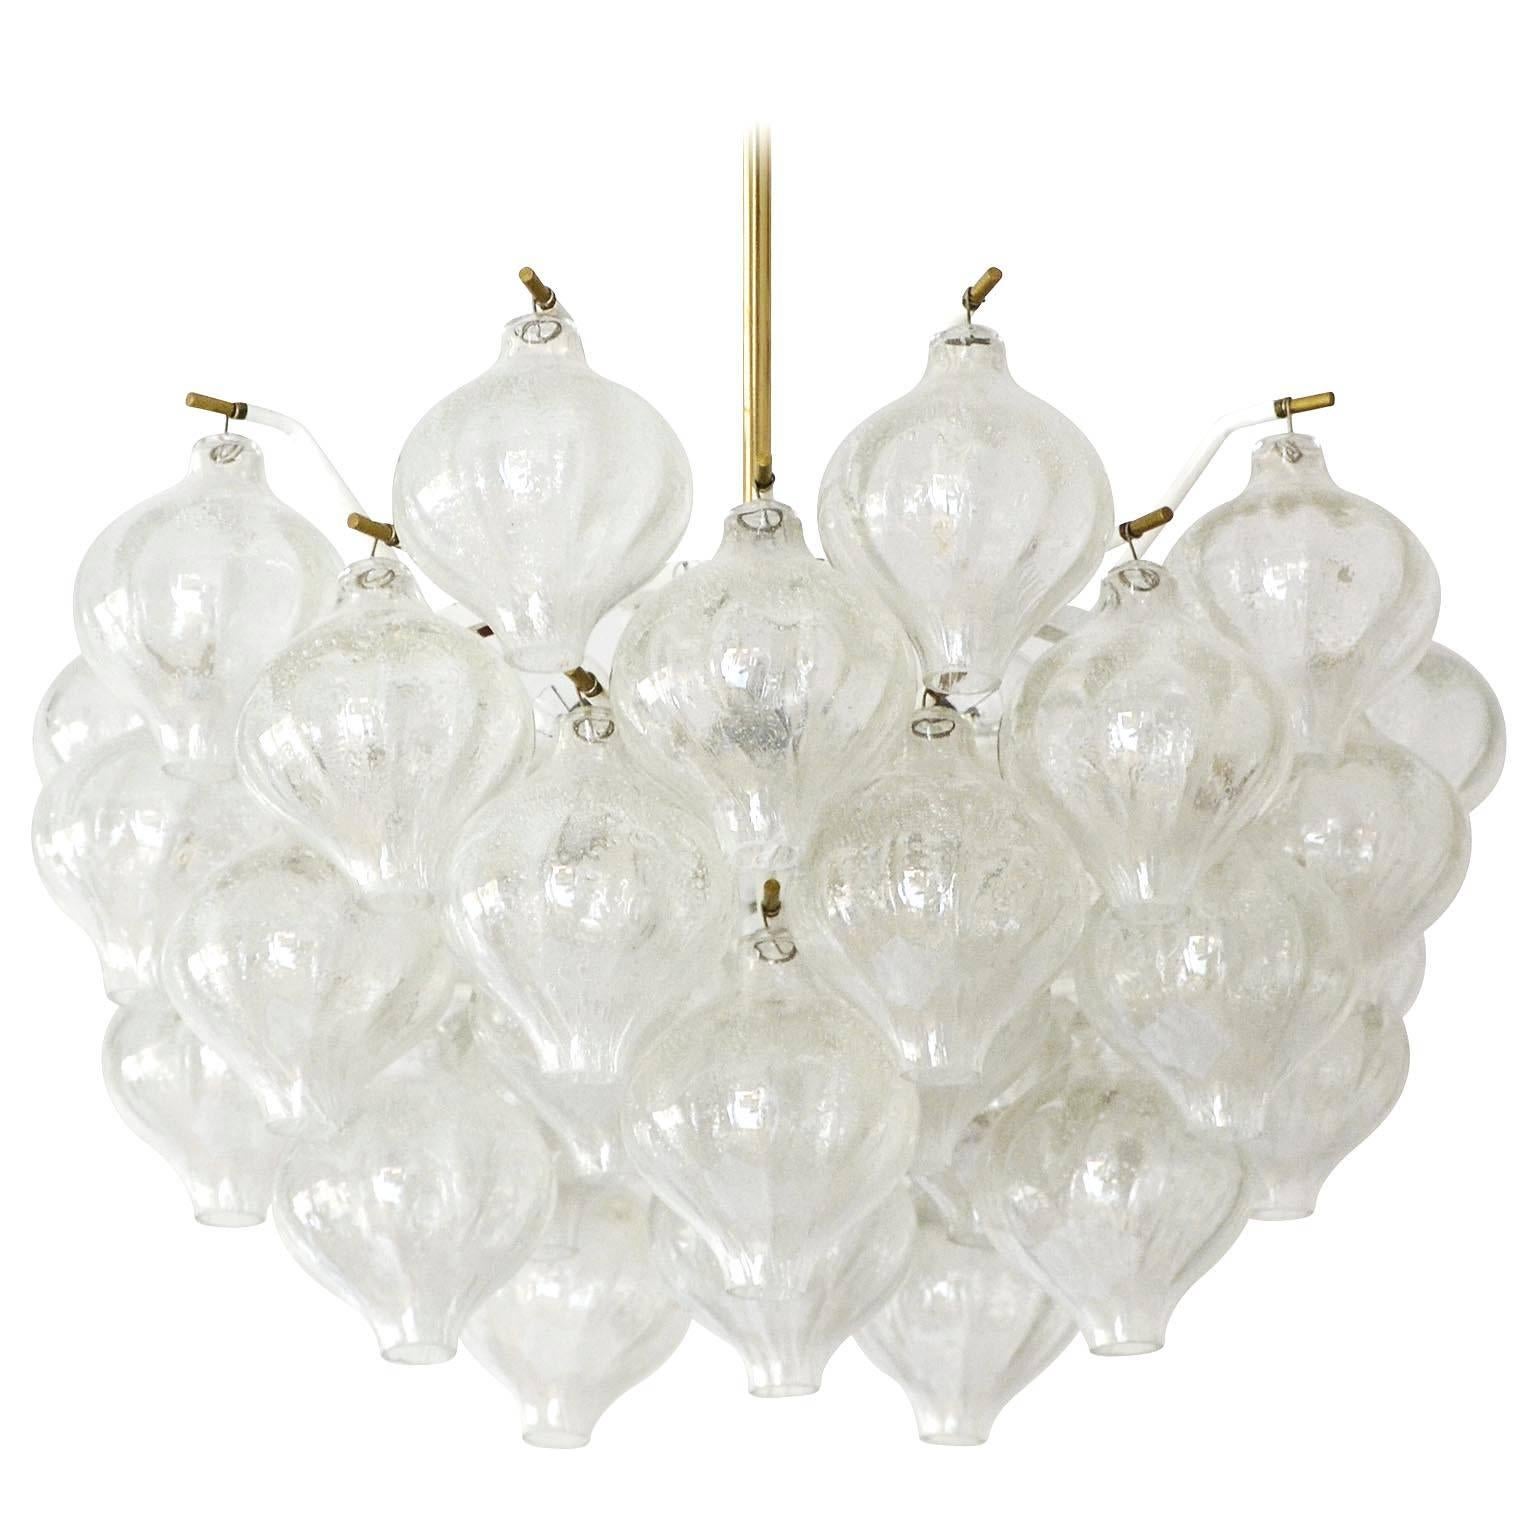 A fantastic light fixture model Tulipan by J.T. Kalmar, Vienna, Austria, manufactured in midcentury, circa 1970 (late 1960s-early 1970s).
The name Tulipan derives from the tulip shaped handblown bubble glasses. Each glass is handmade and therefore a